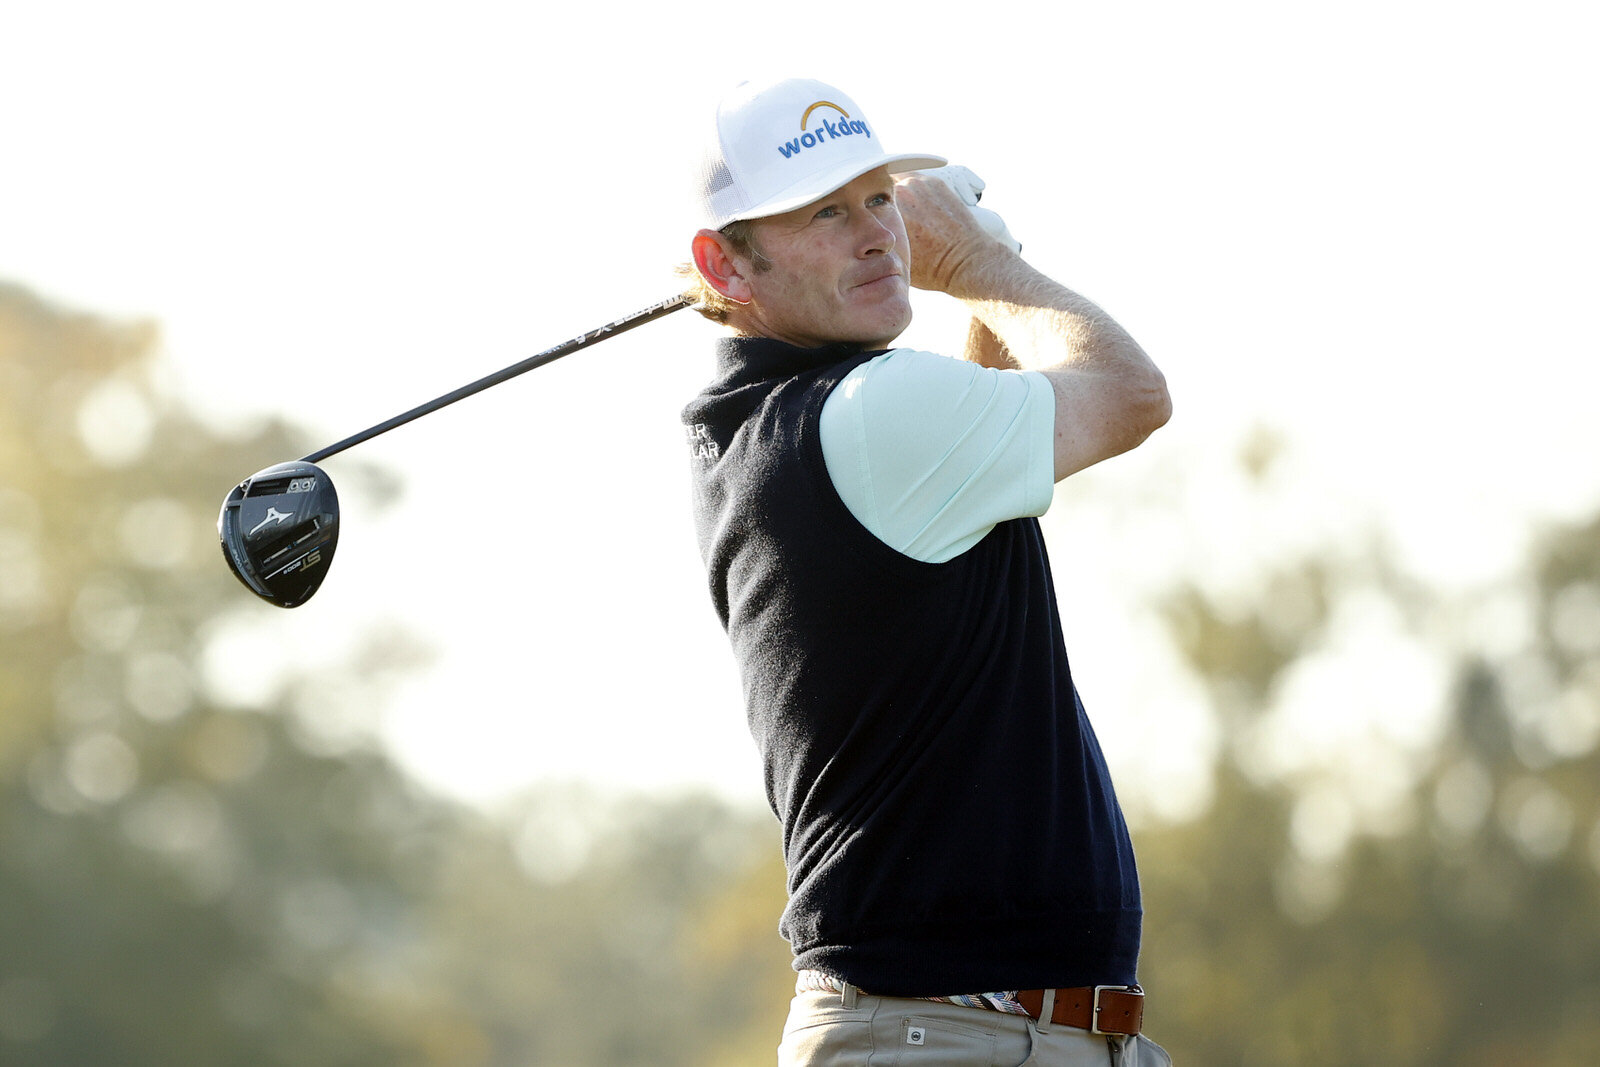  HOUSTON, TEXAS - NOVEMBER 06: Brandt Snedeker of the United States plays his shot from the 10th tee during the second round of the Houston Open at Memorial Park Golf Course on November 06, 2020 in Houston, Texas. (Photo by Maddie Meyer/Getty Images)